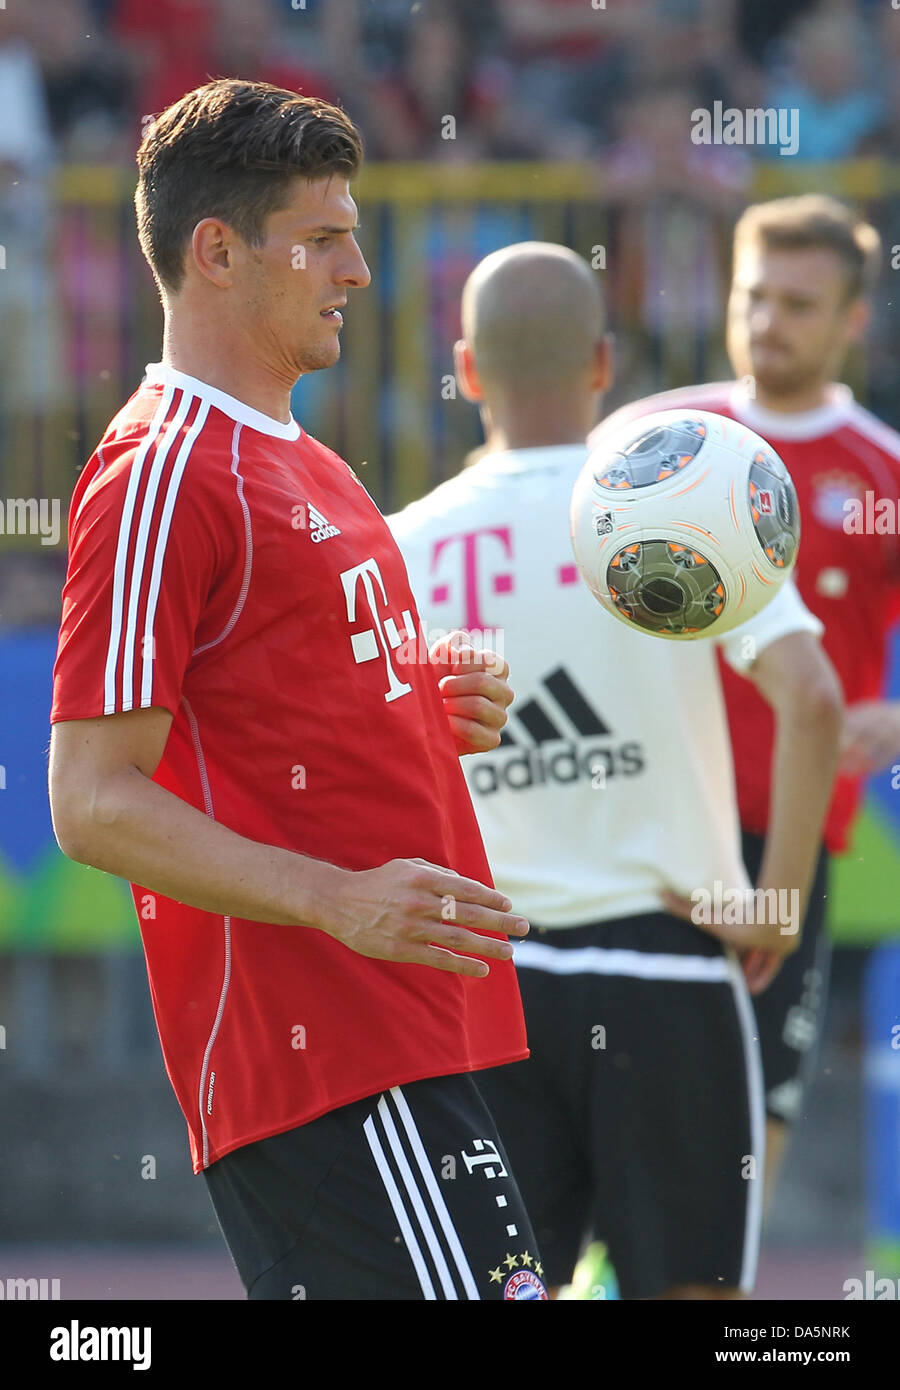 Mario Gomez (L) of Bundesliga soccer club FC Bayern Munich is pictured during a traning session in Arco, Italy, 04 July 2013. The team of Bayern Munich prepares for the 2013-14  Bundesliga season with a training camp in Arco between 04 and 12 July 2013. Photo: KARL-JOSEF HILDENBRAND Stock Photo